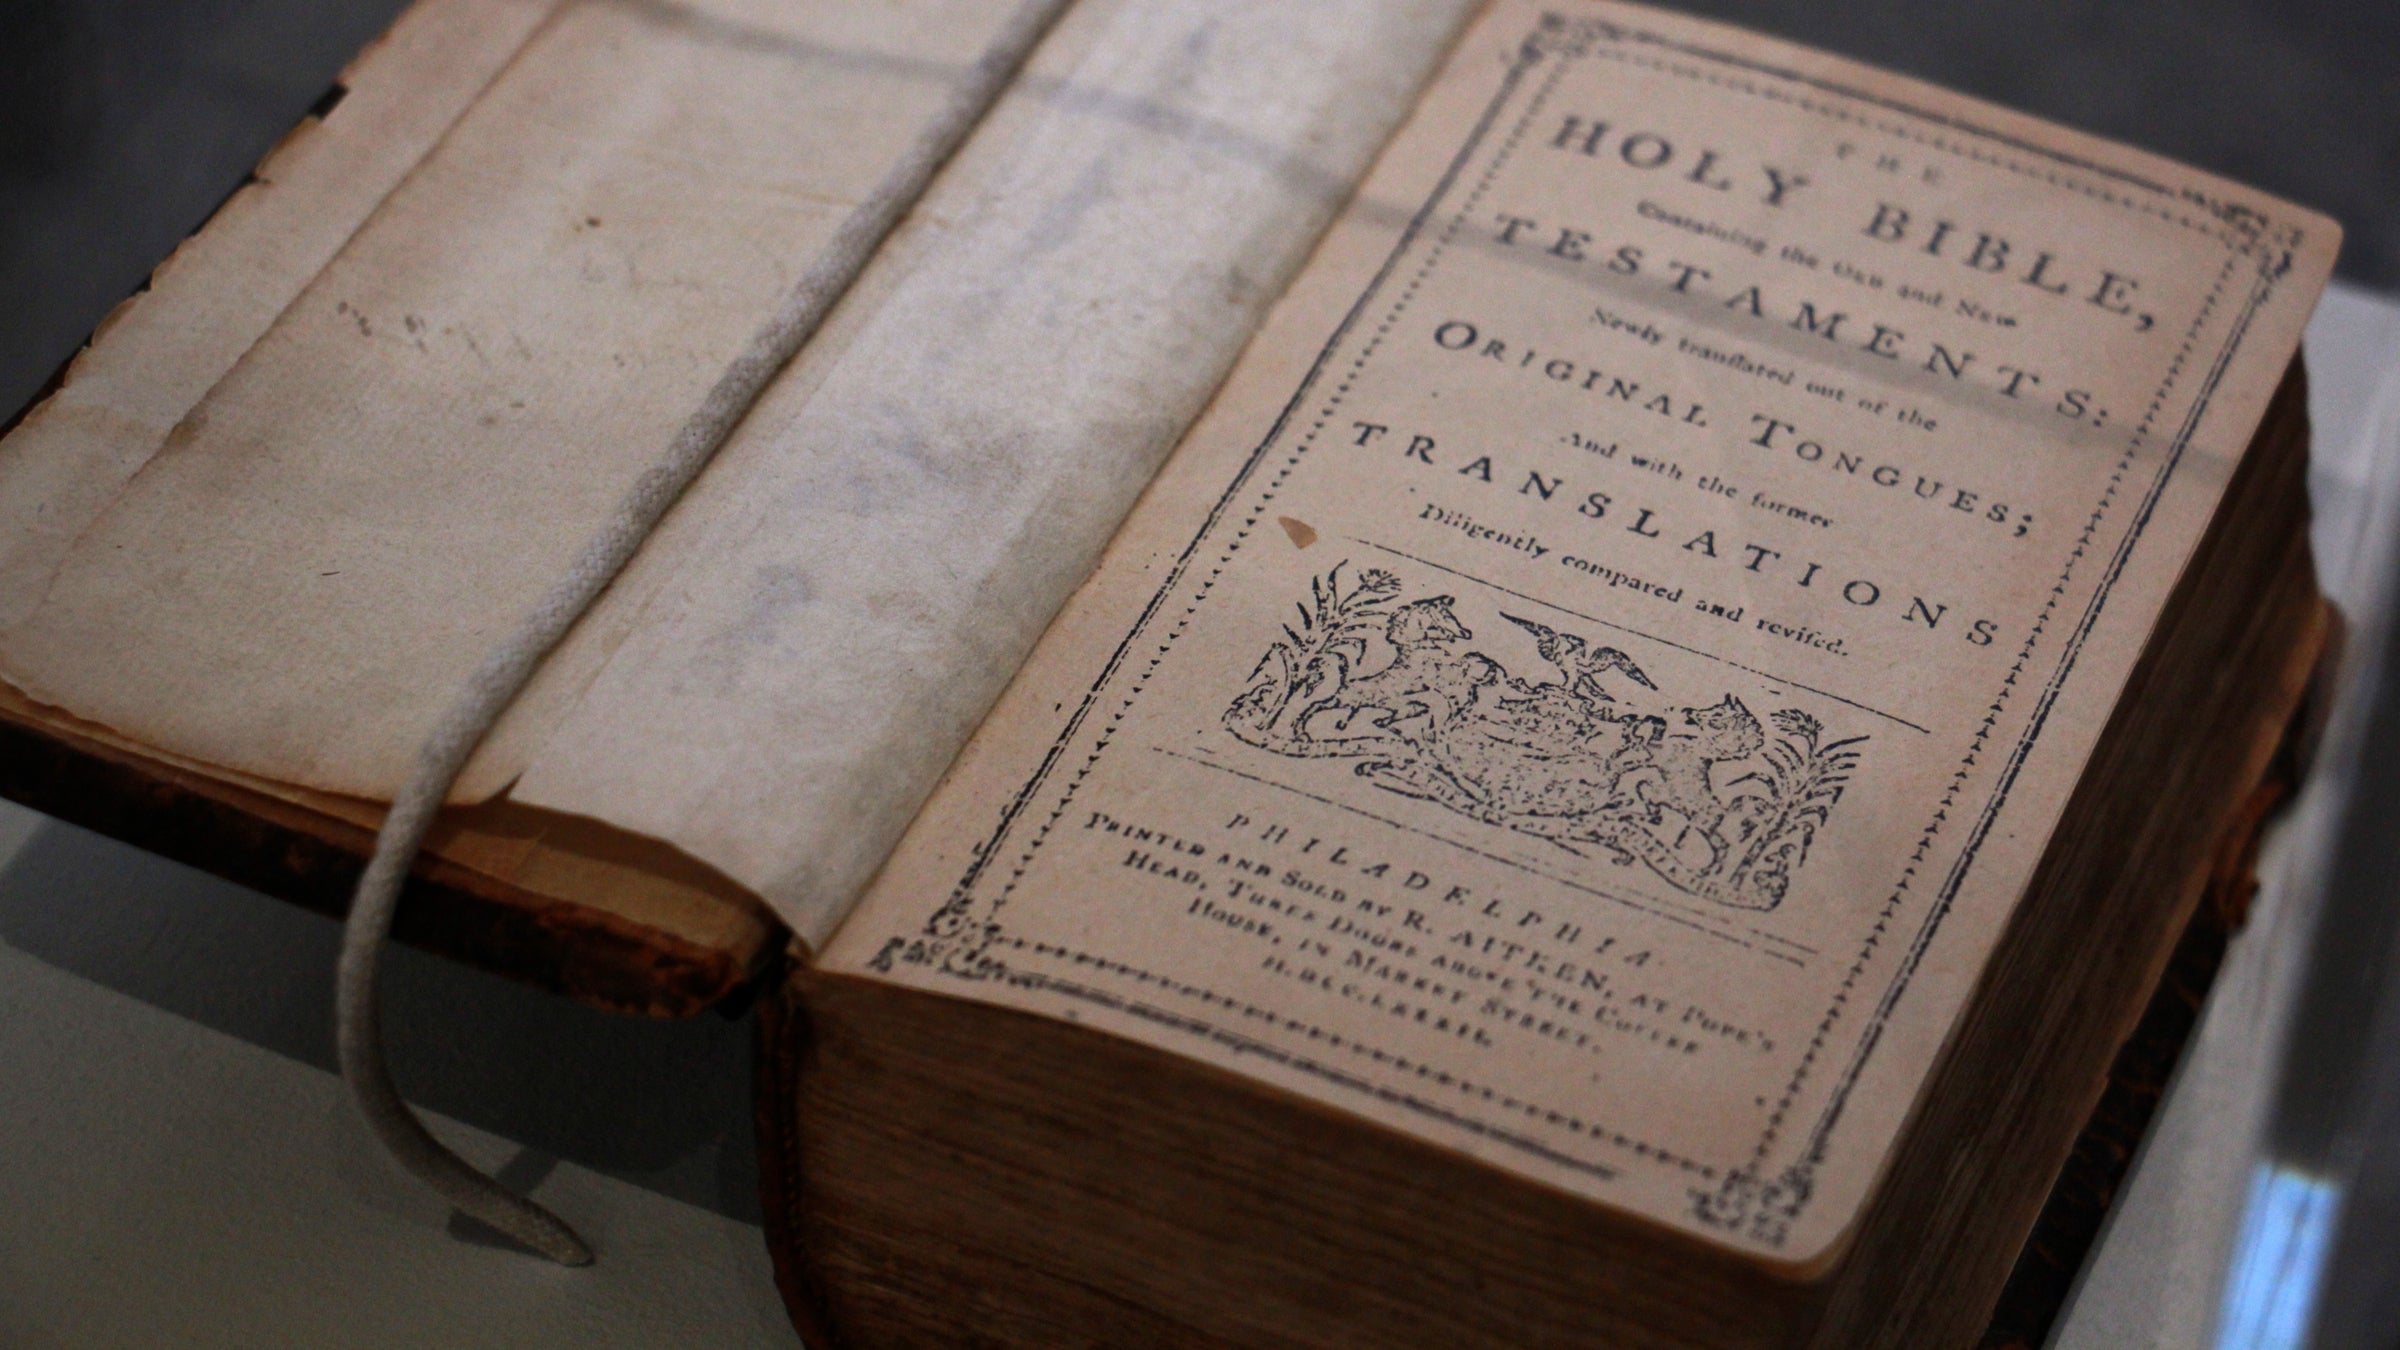 On display is the first English Bible printed in America